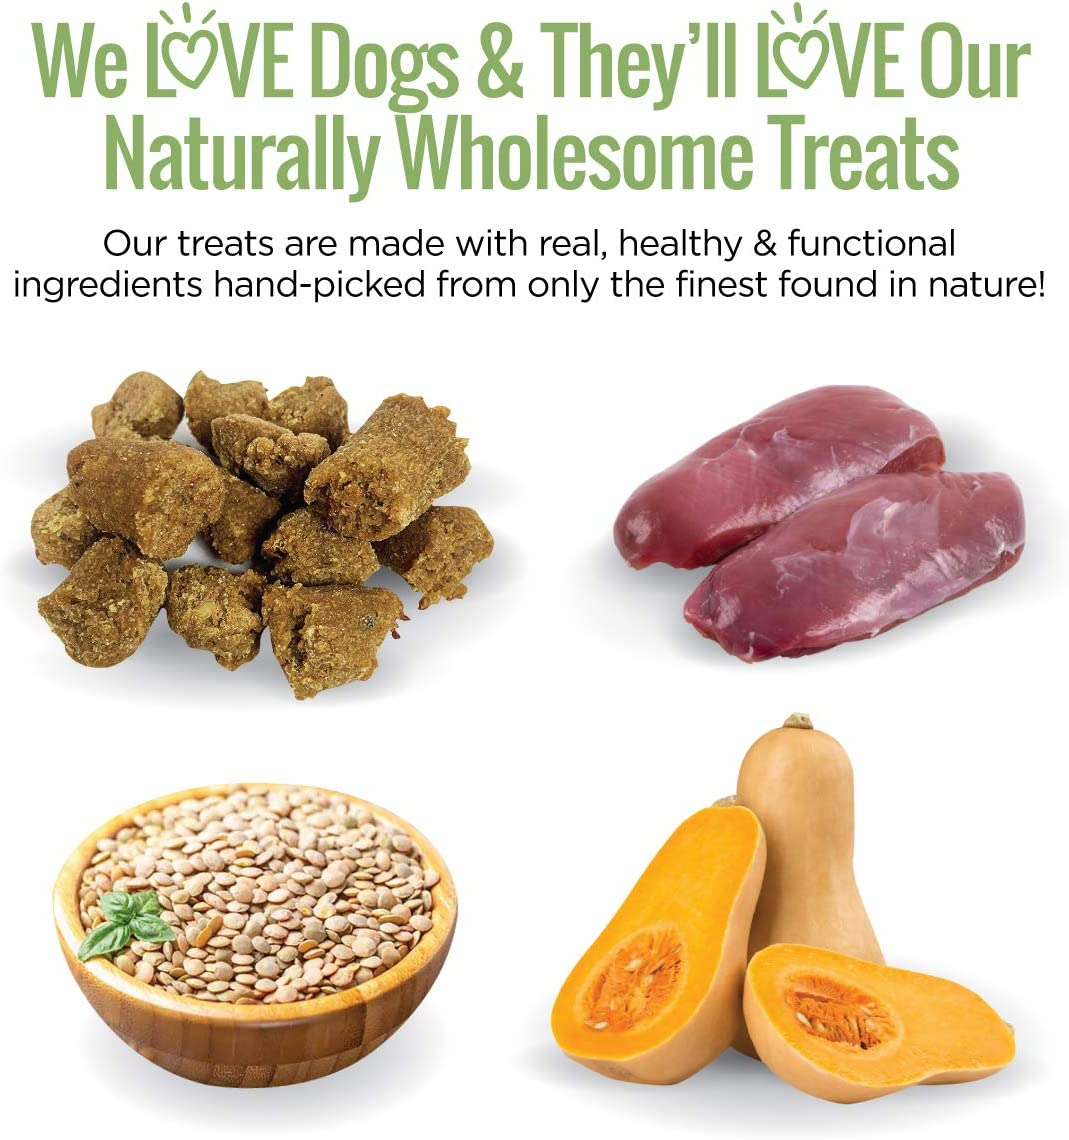 All Natural Soft Dog Treats - Limited Ingredient Training Treats for Dogs and Puppies with Allergies or Sensitive Stomachs - Grain-Free, Chewy, Human-Grade - Available in 4 Flavors - 5Oz